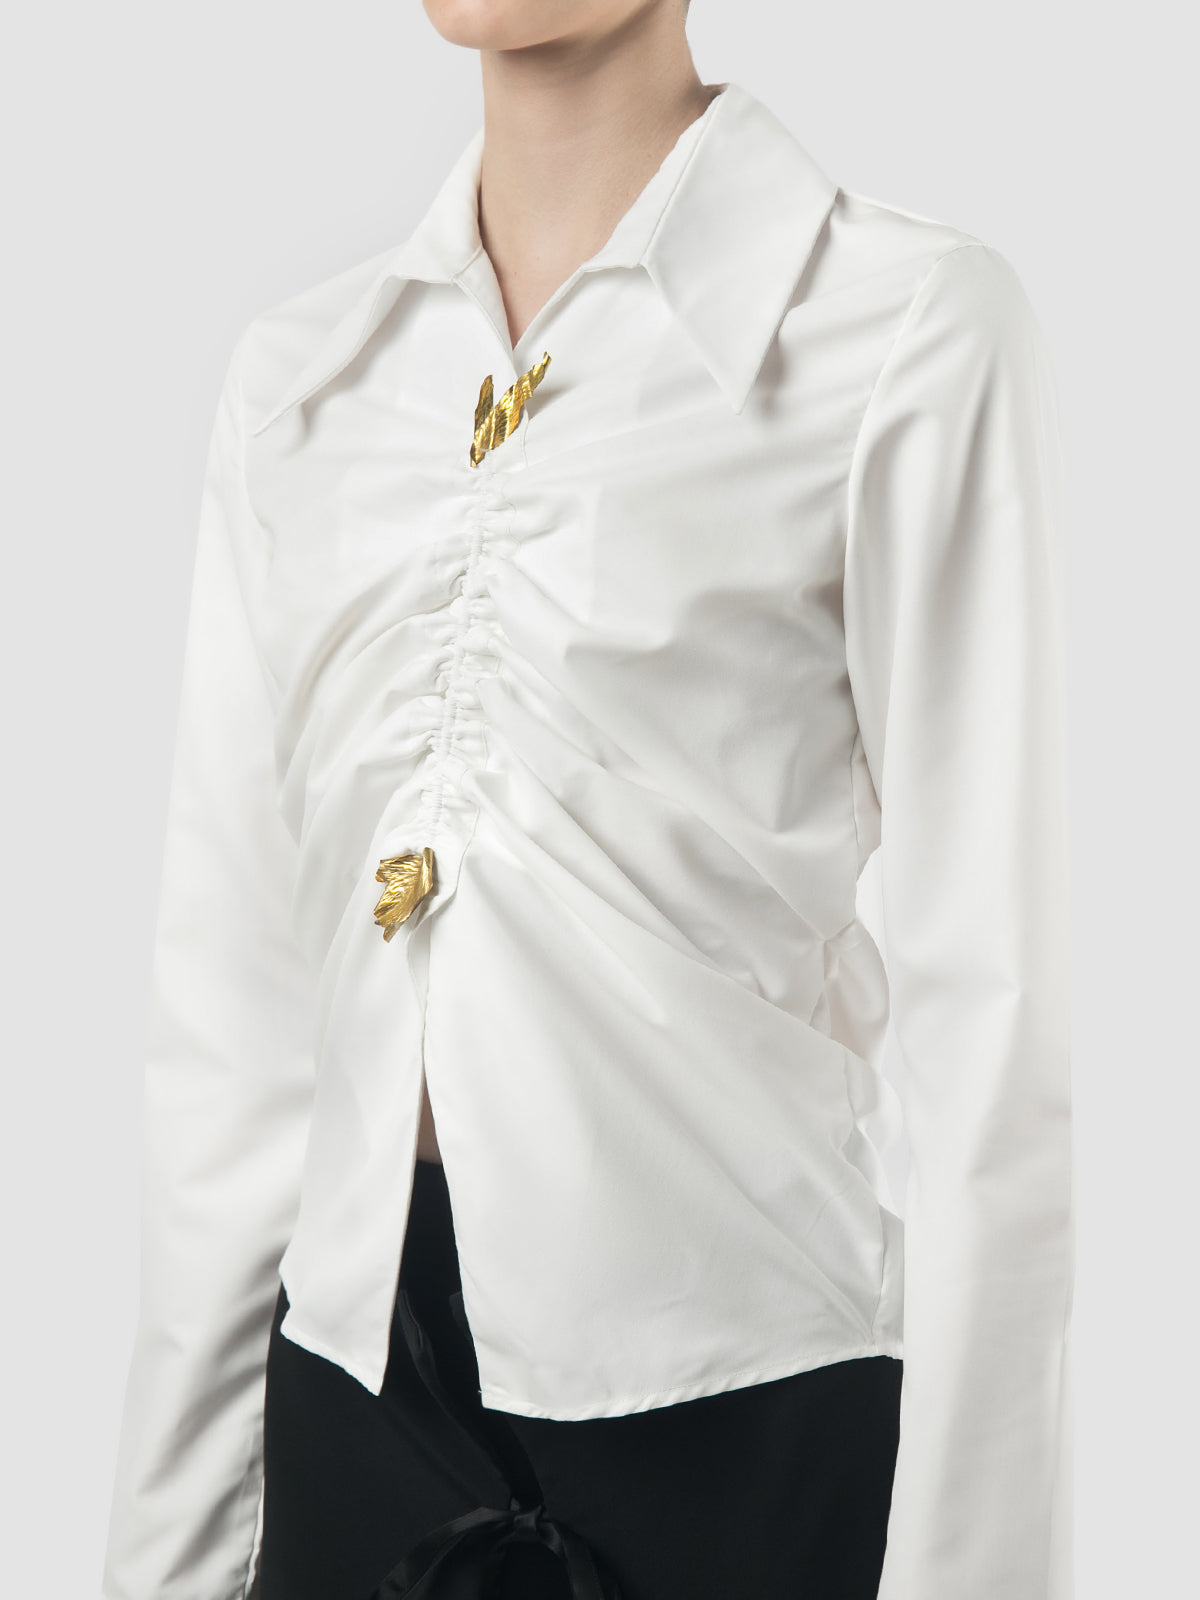 White deconstructed gathered shirt with abstract rod